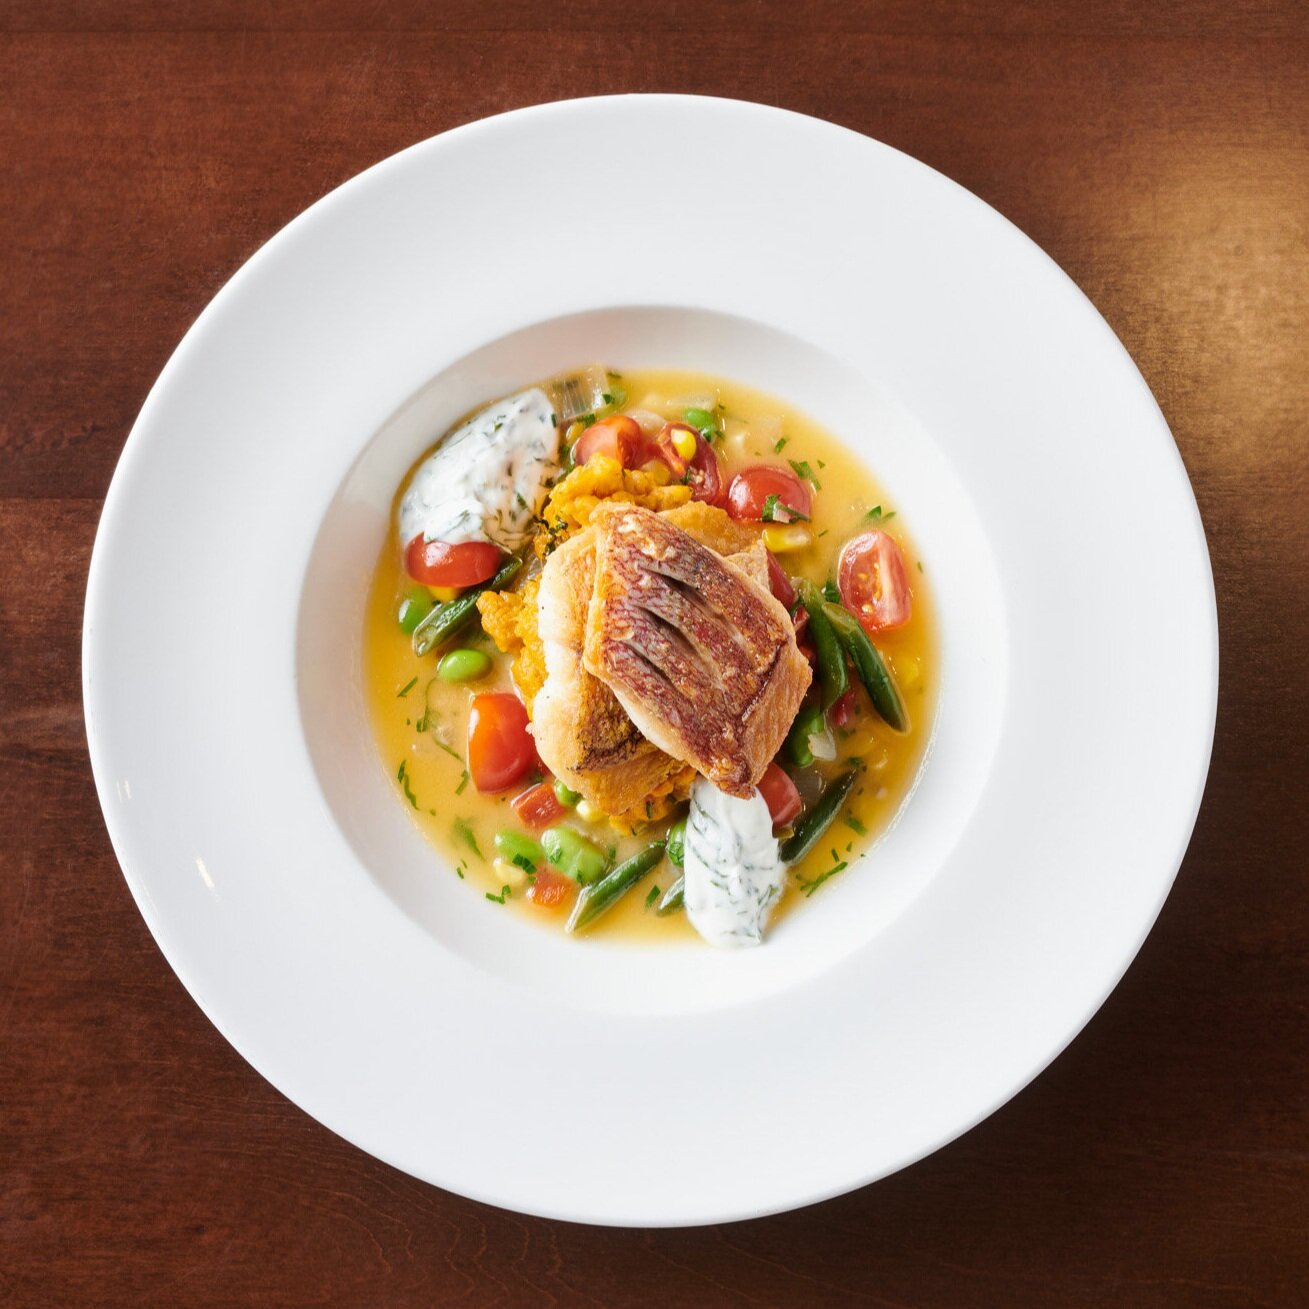 An entrée at The Restaurant of Pan-seared Red Snapper Succotash, Forked Potatoes, Herb Sour Cream (Copy) (Copy)